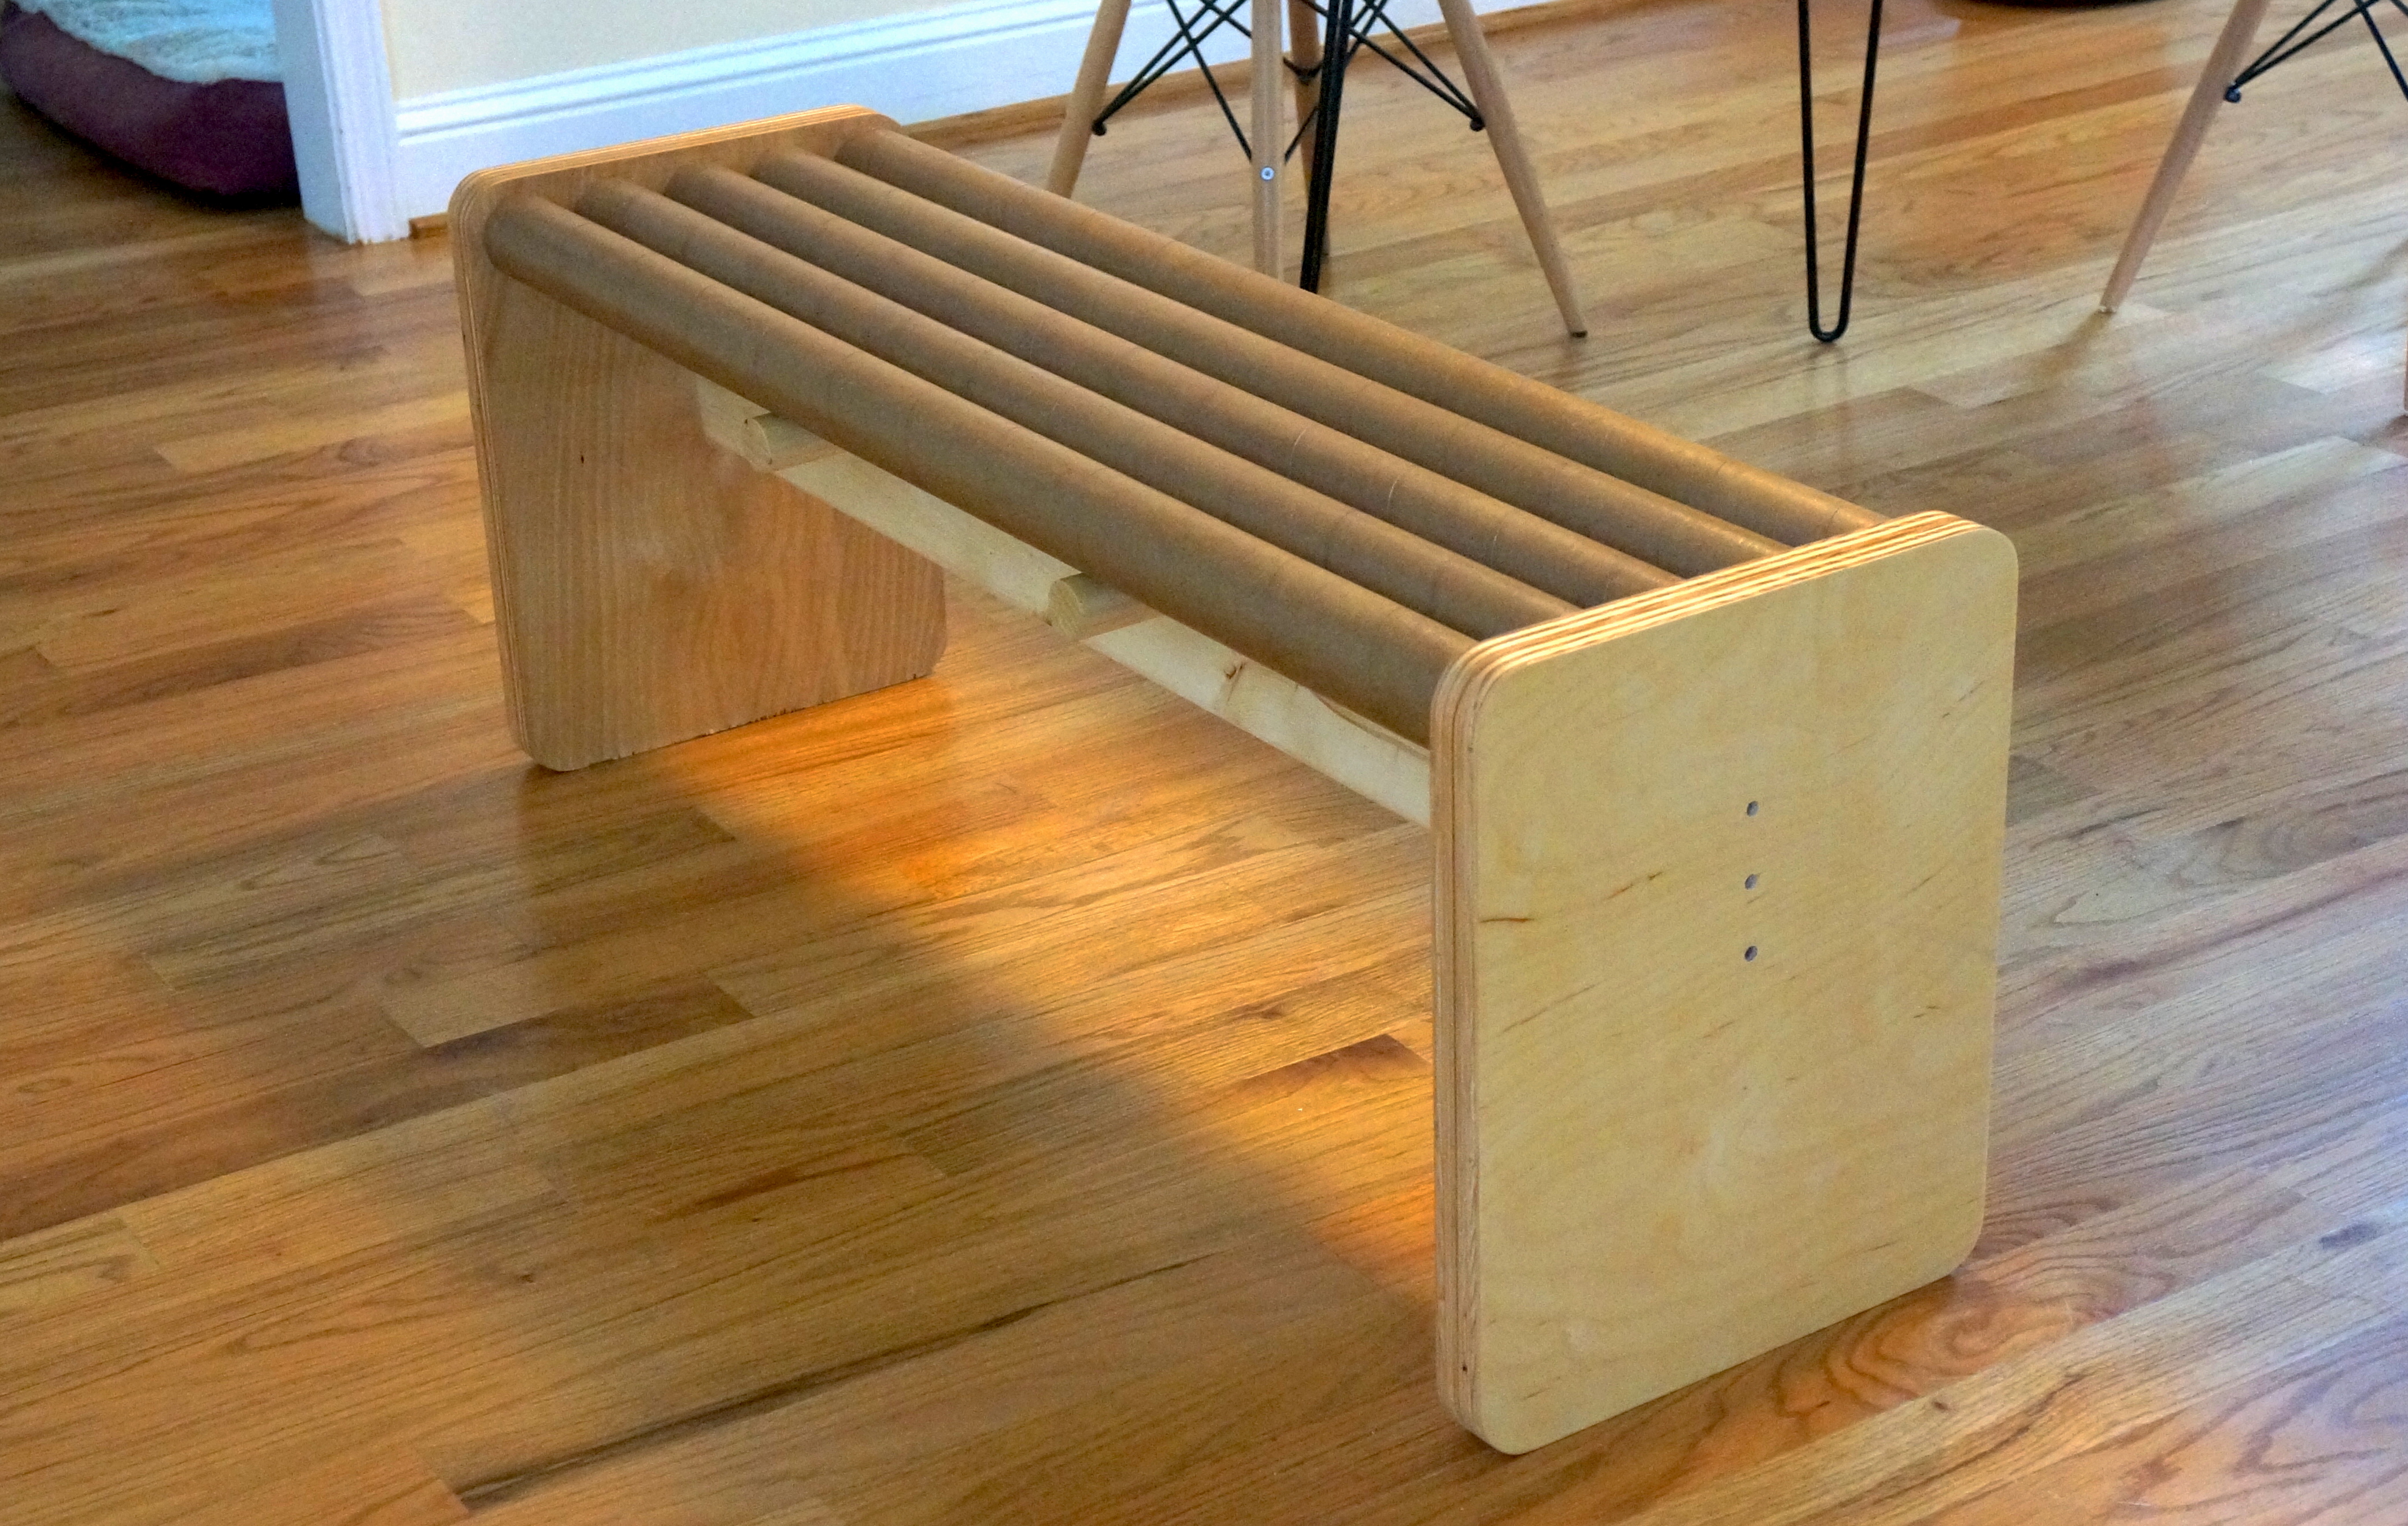 Build a Modern Bench With Cardboard Tubes | Make: